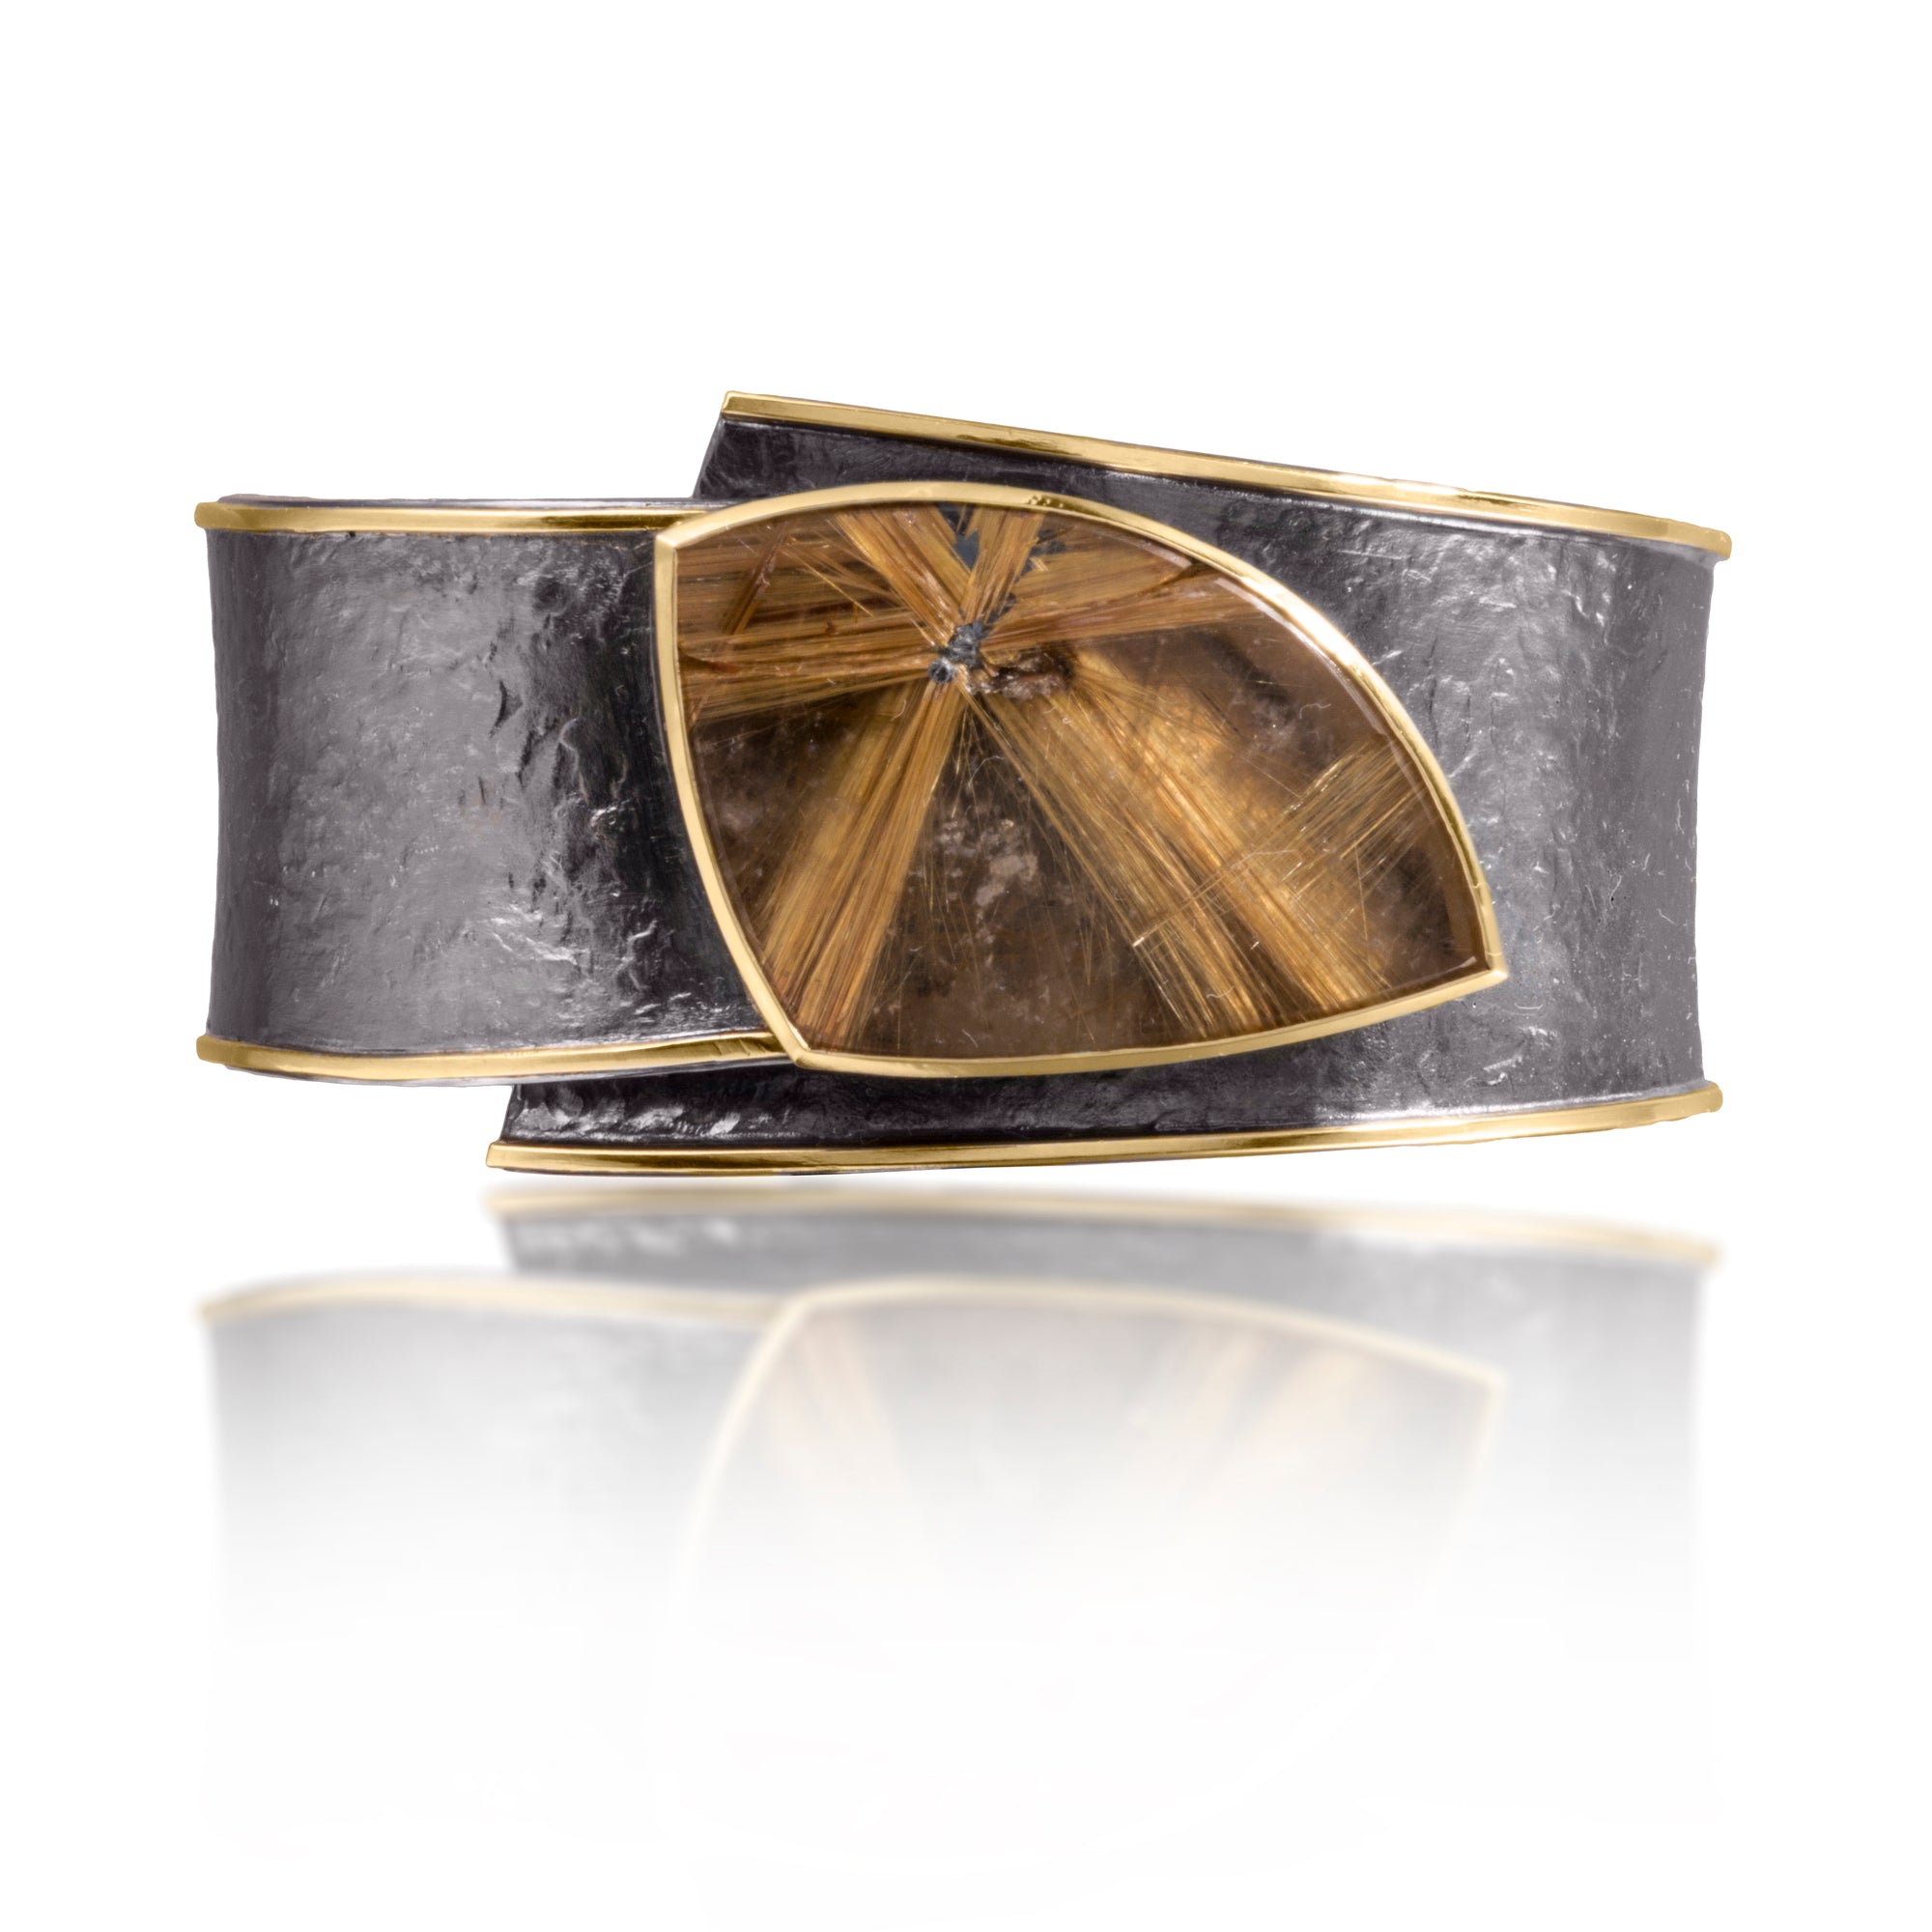 This one-of-a-kind Cyclone Cuffs in 18k gold and oxidized silver is bezel set with a large, star Rutilated Quartz. A hinge on the back side of this tapered cuff allows it to fully open, making it incredibly easy to put on and off with one hand. Wide, wrap-around style cuff, hand fabricated, spring steel hinge, hammer textured. Rutilated Quartz 48.34 tcw.